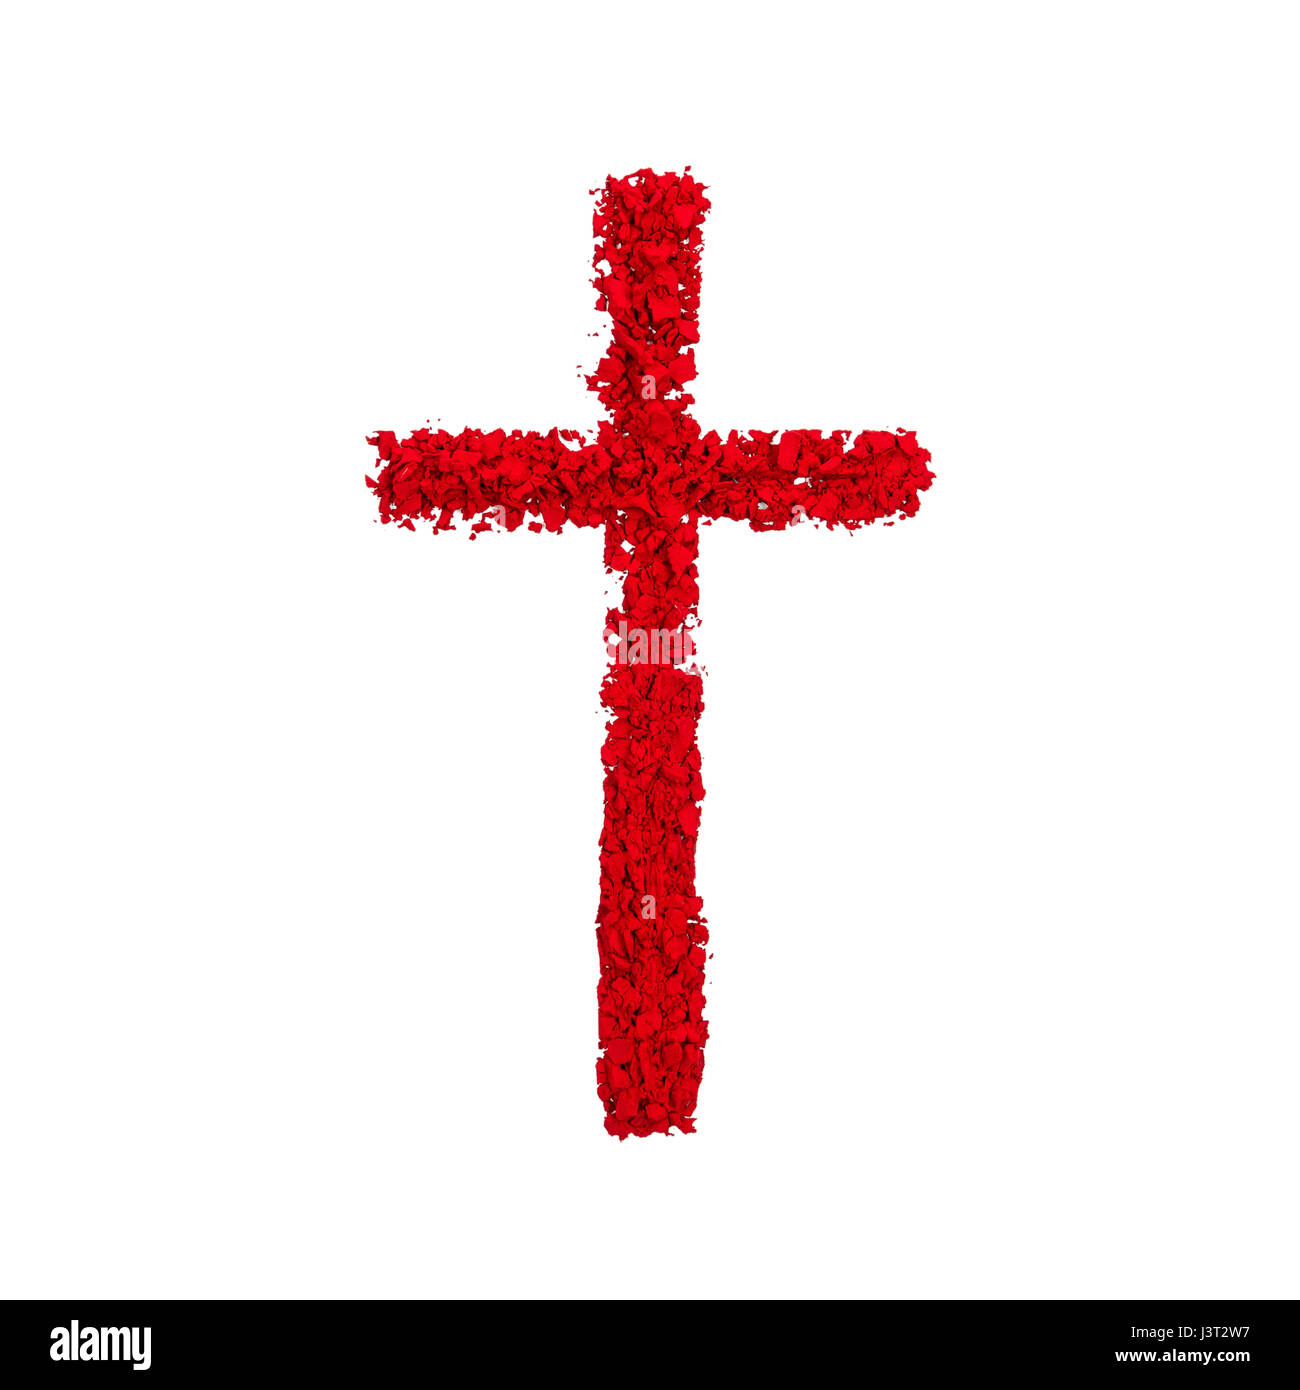 Christian Cross made with red color powder, isolated on a white background  Stock Photo - Alamy